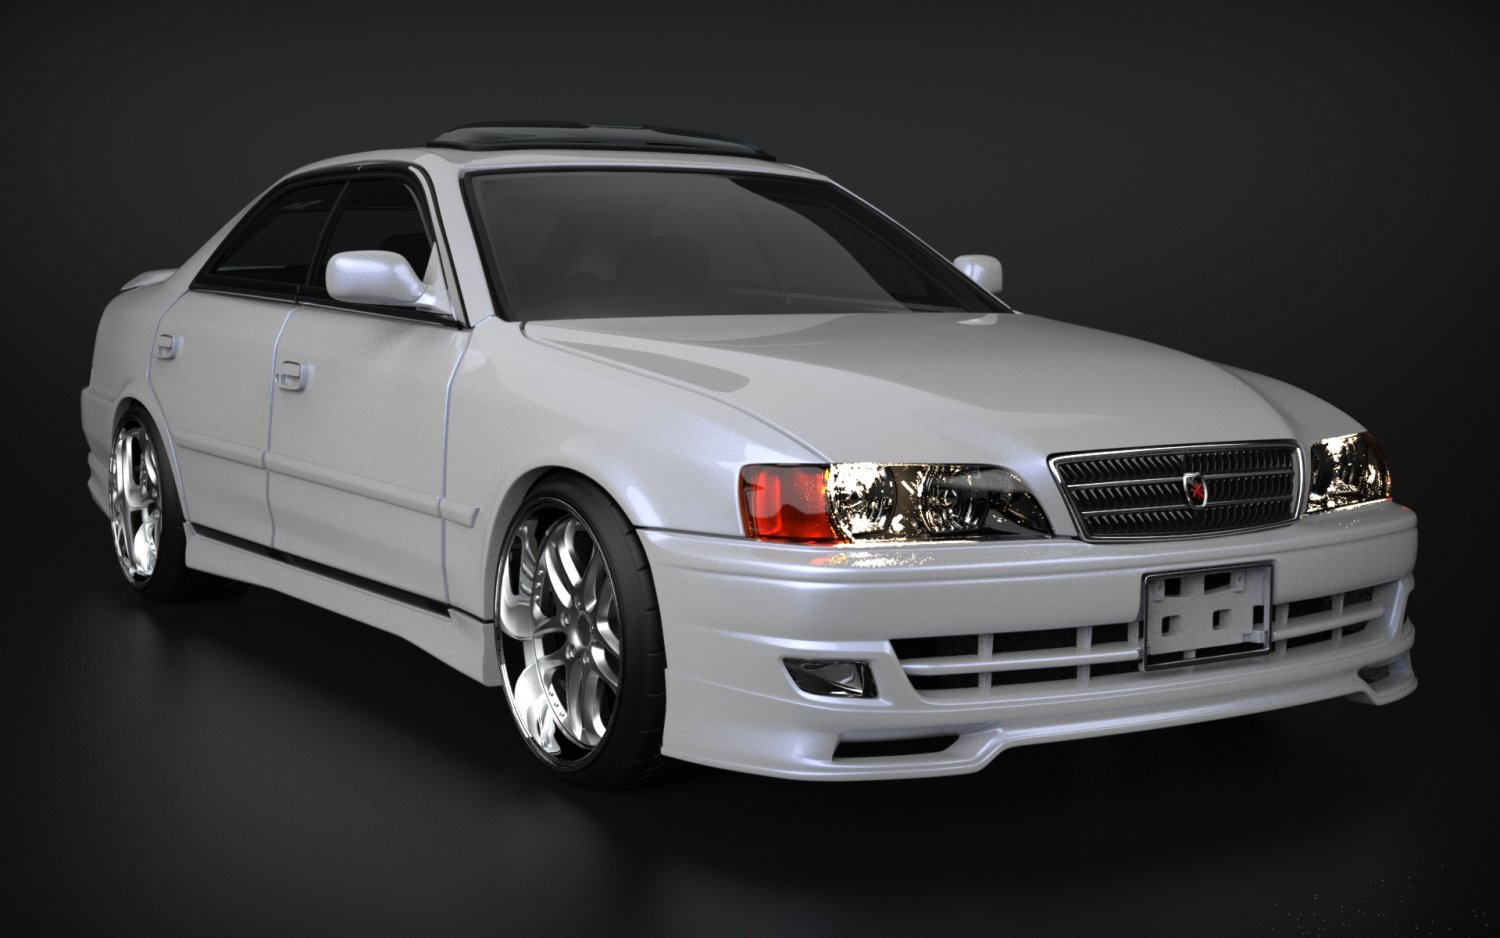 1993 Toyota Chaser Base with 19x9 Work Bersaglio and Federal 225x35 on  Coilovers  767204  Fitment Industries